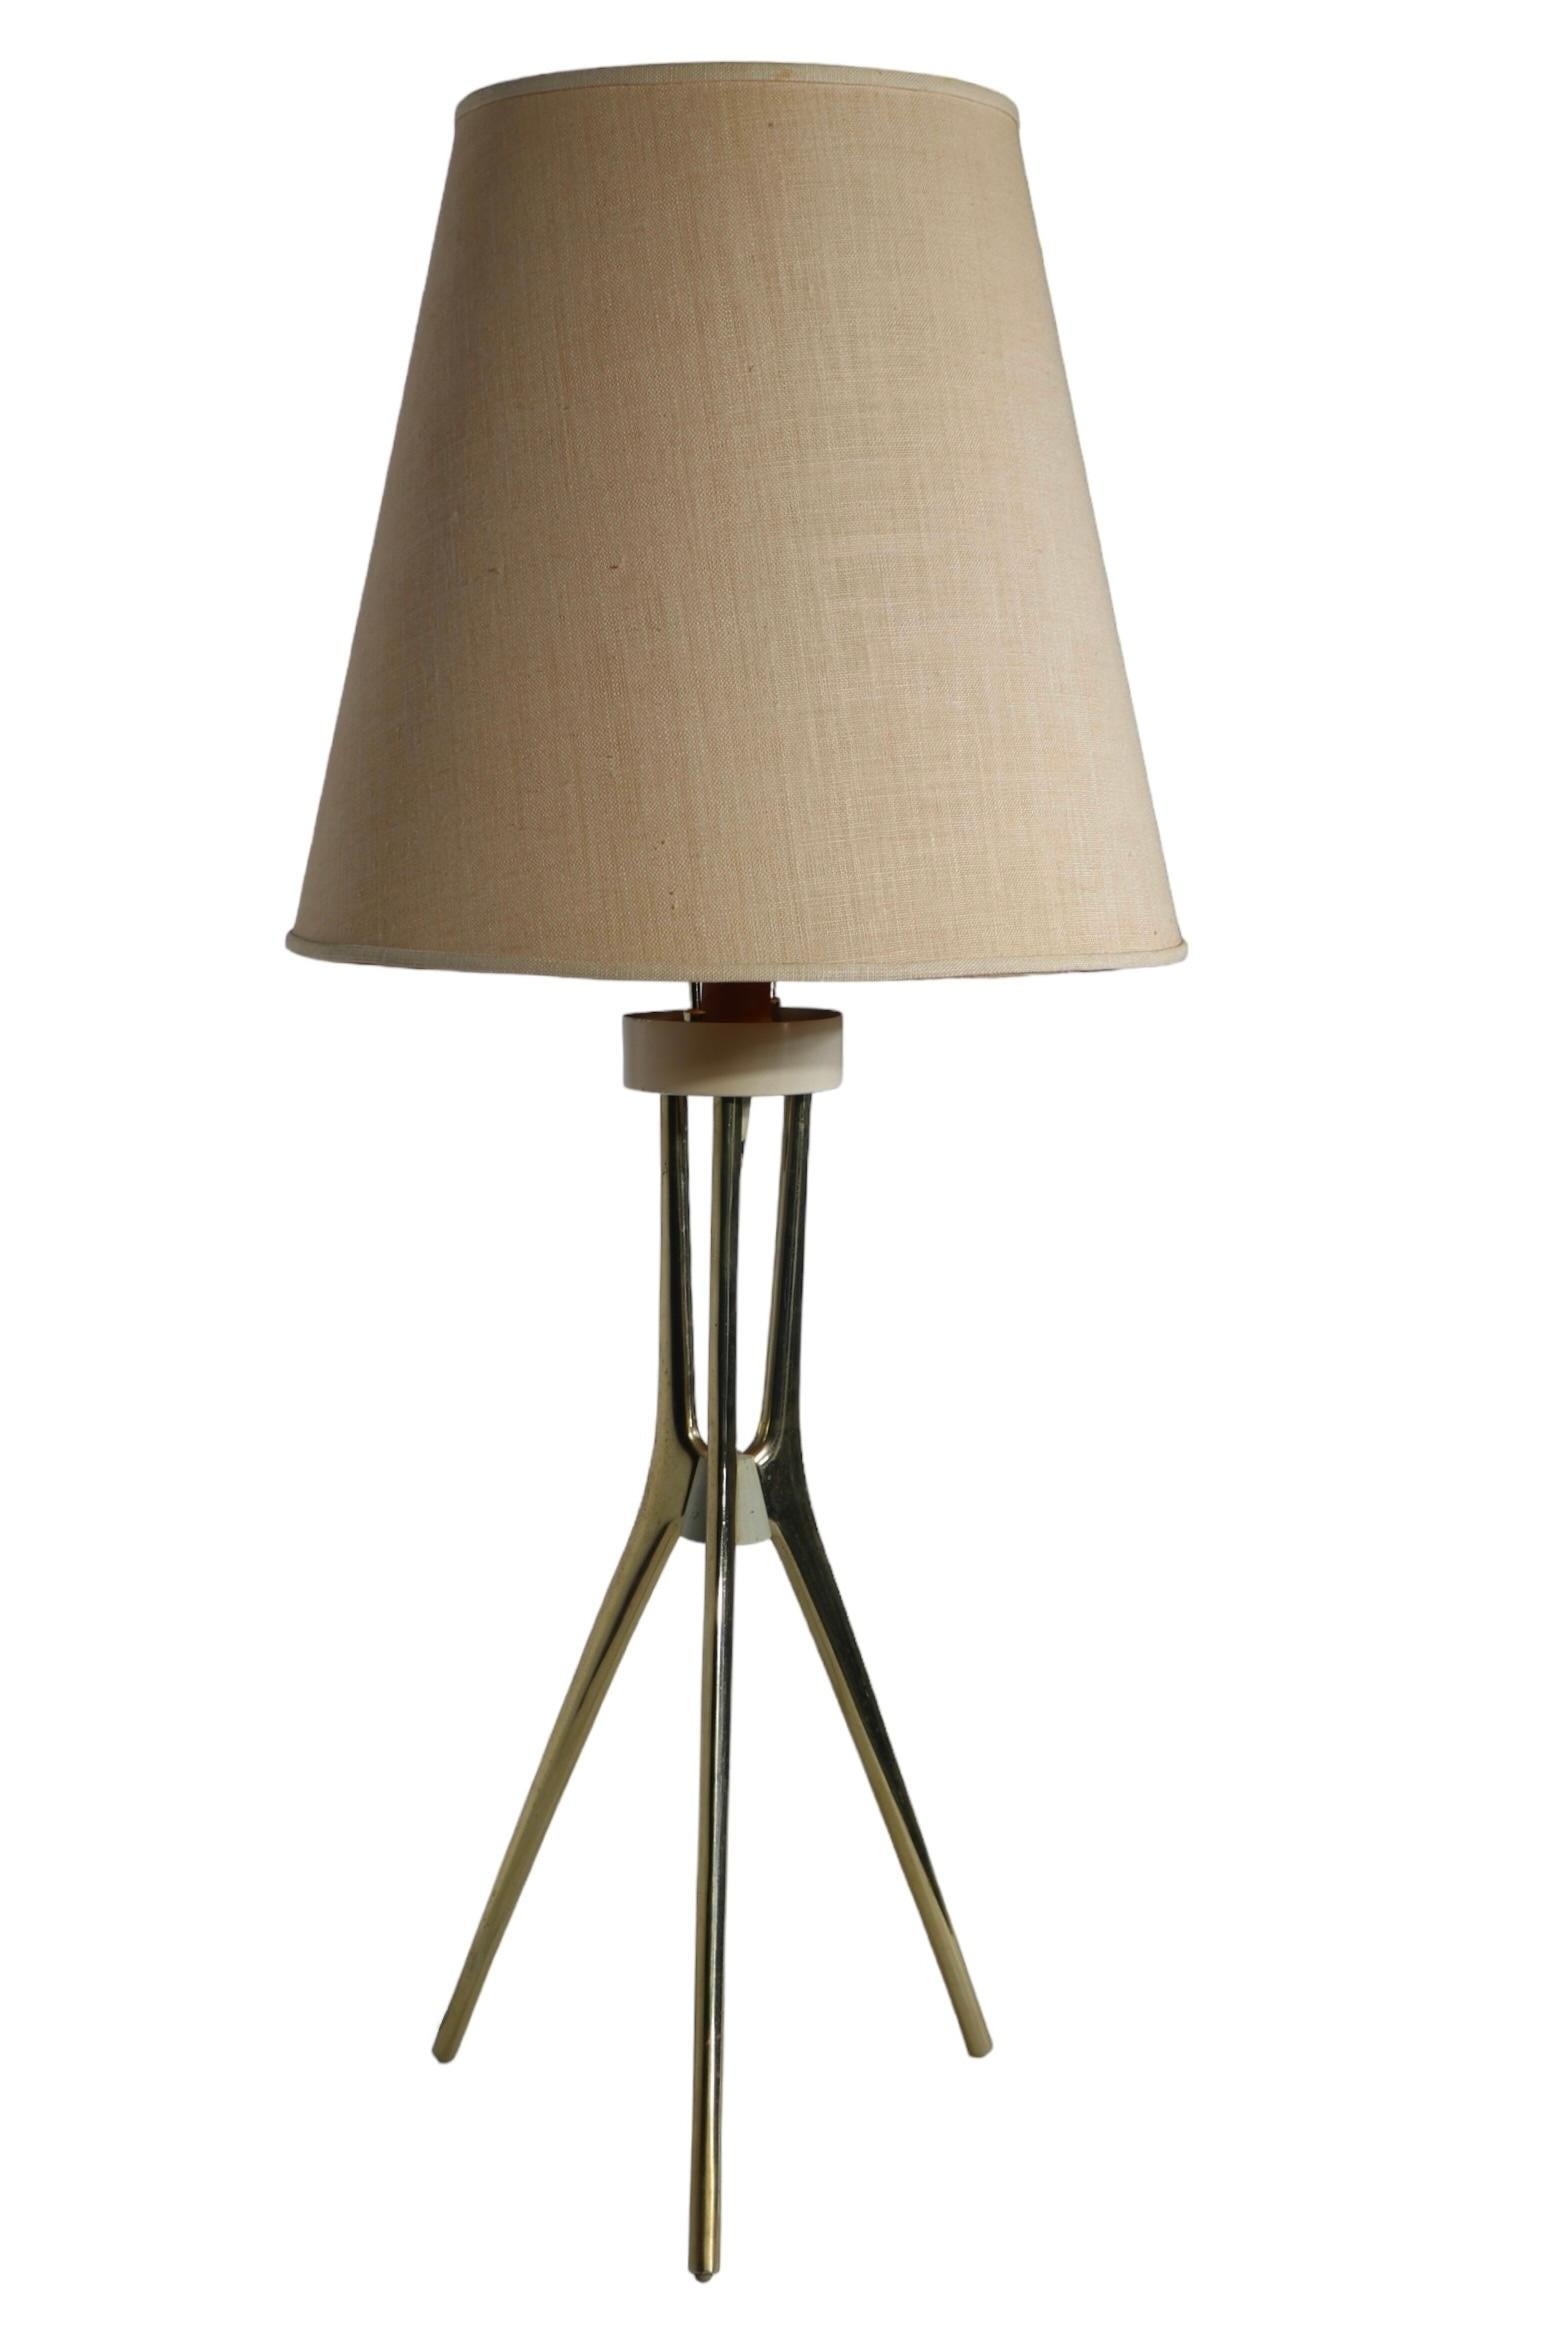 American Atomic Mid Century Table Lamp by Lightolier att. to Thurston c. 1950/ 60's For Sale